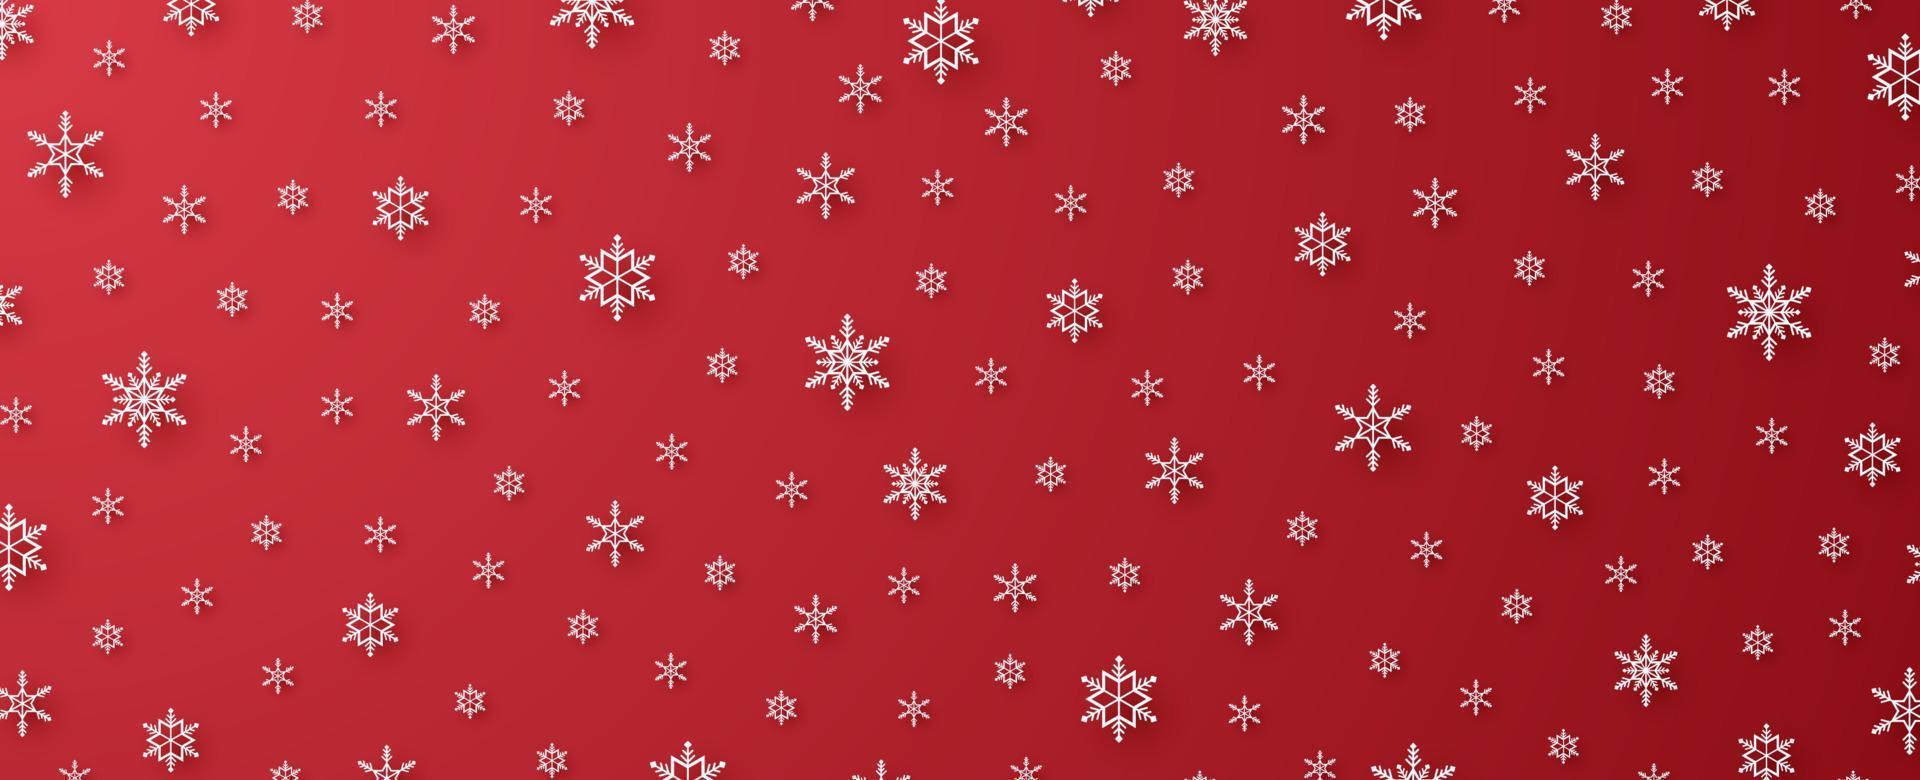 Merry Christmas with snowflakes and snowfall background in paper art style vector